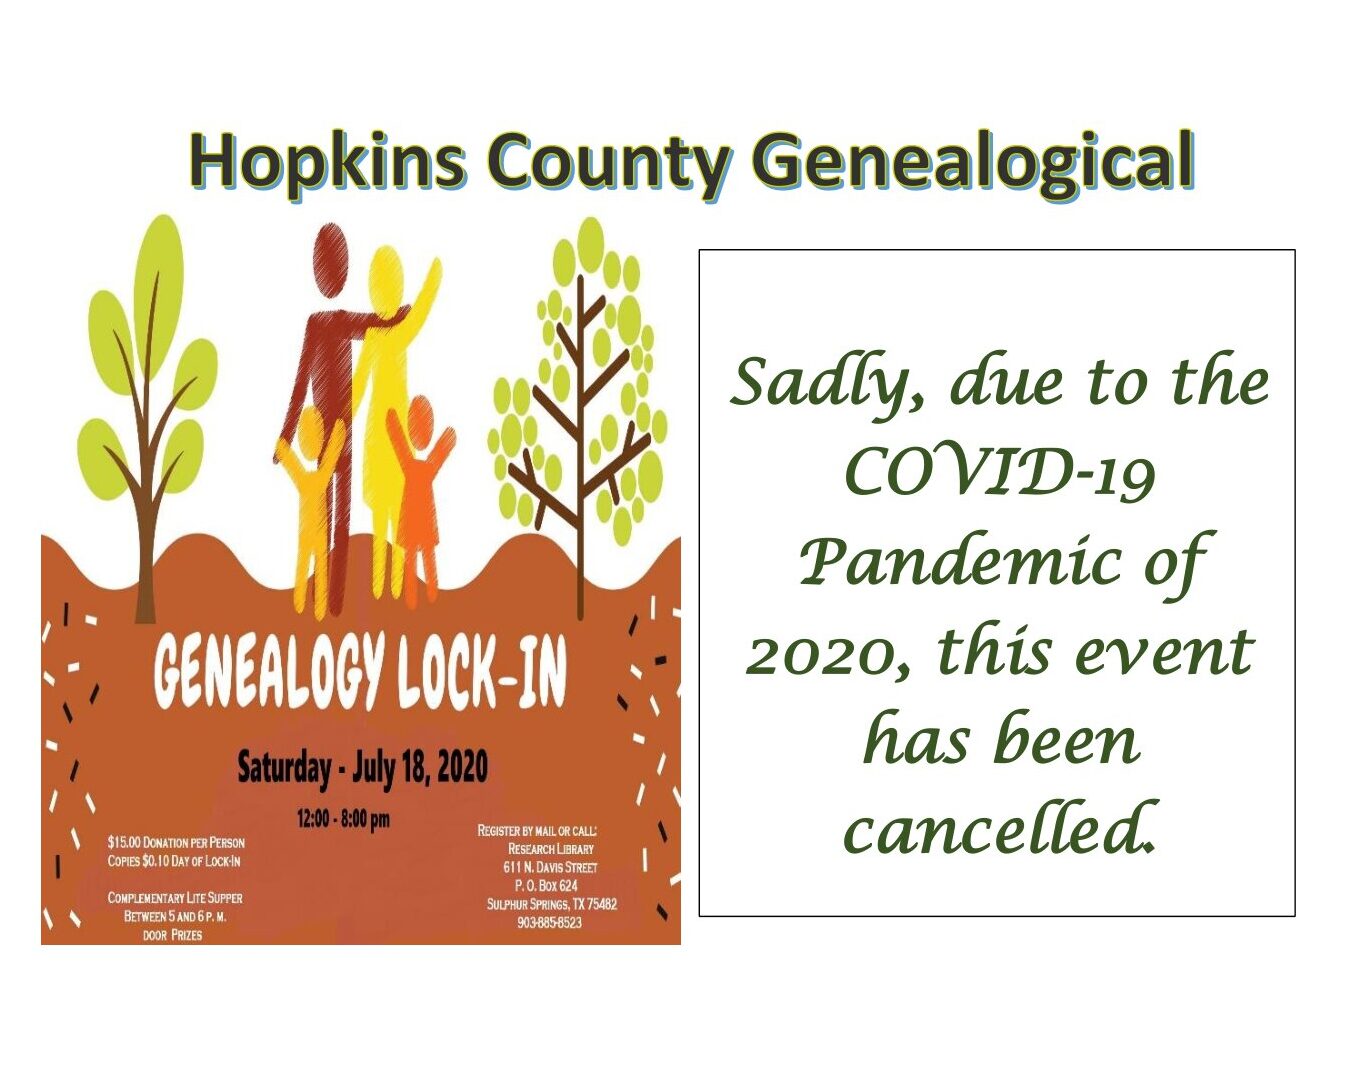 Hopkins County Genealogical Society Cancels July 18th Lock-In